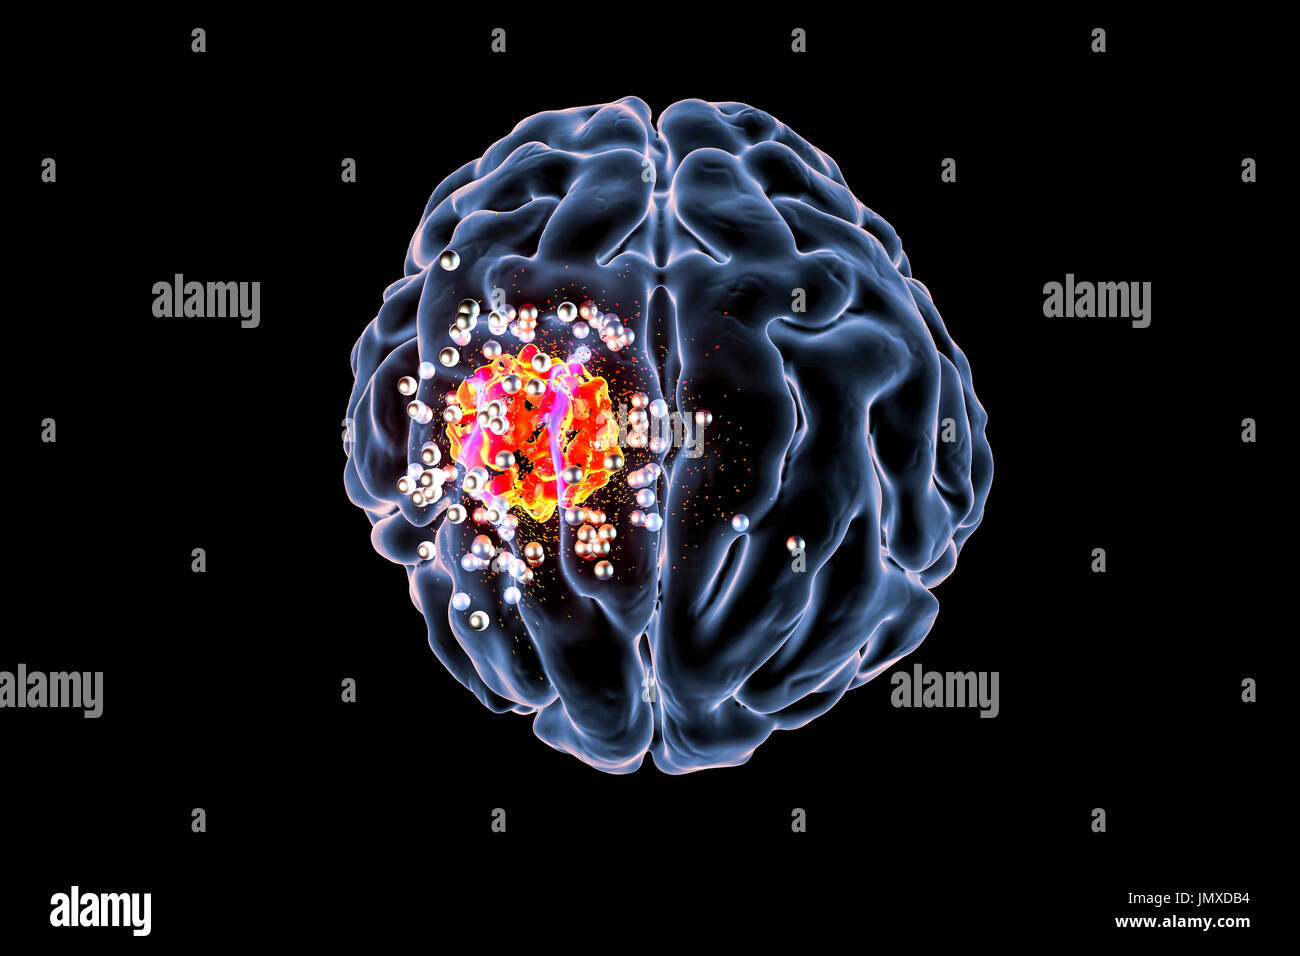 Conceptual image for brain cancer treatment with nanotechnology. Computer illustration showing destruction of brain tumour by nanoparticles. Stock Photo